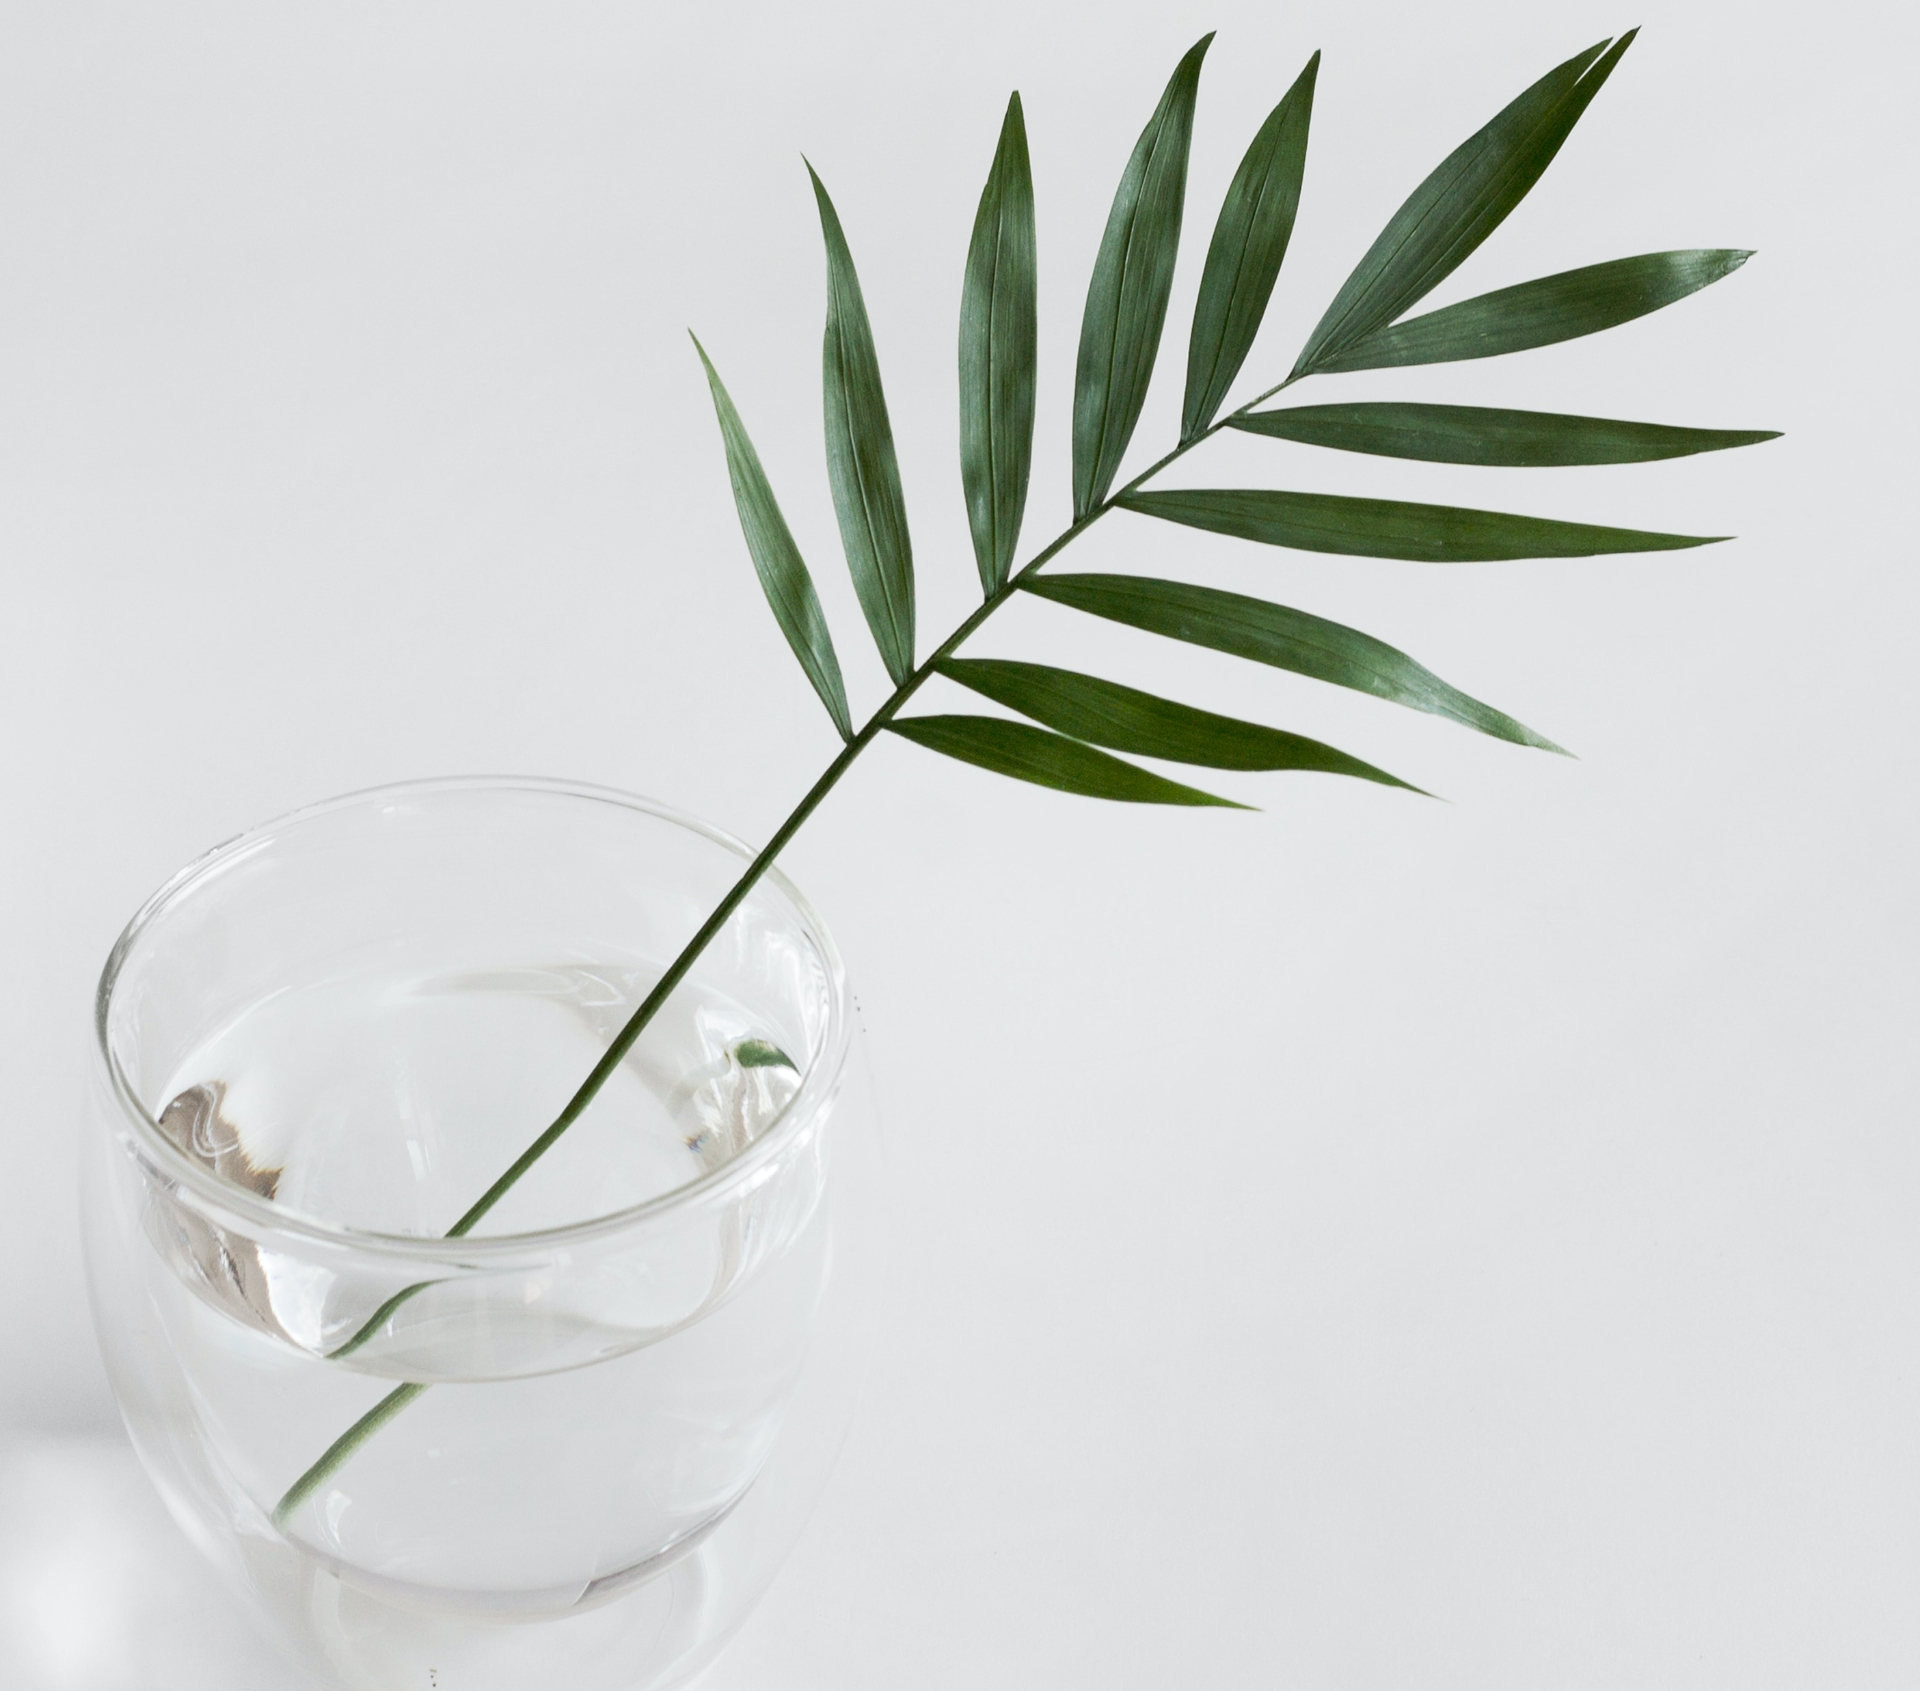 Image of a palm leaf in a glass bowl. Bariatric therapy can help you post-bariatric surgery in Orlando, FL area 33626. Our bariatric therapist is ready to help you today in Winter Park, FL 33755! Contact us to start bariatric surgery counseling in Orlando, FL 33129. Florida 32765